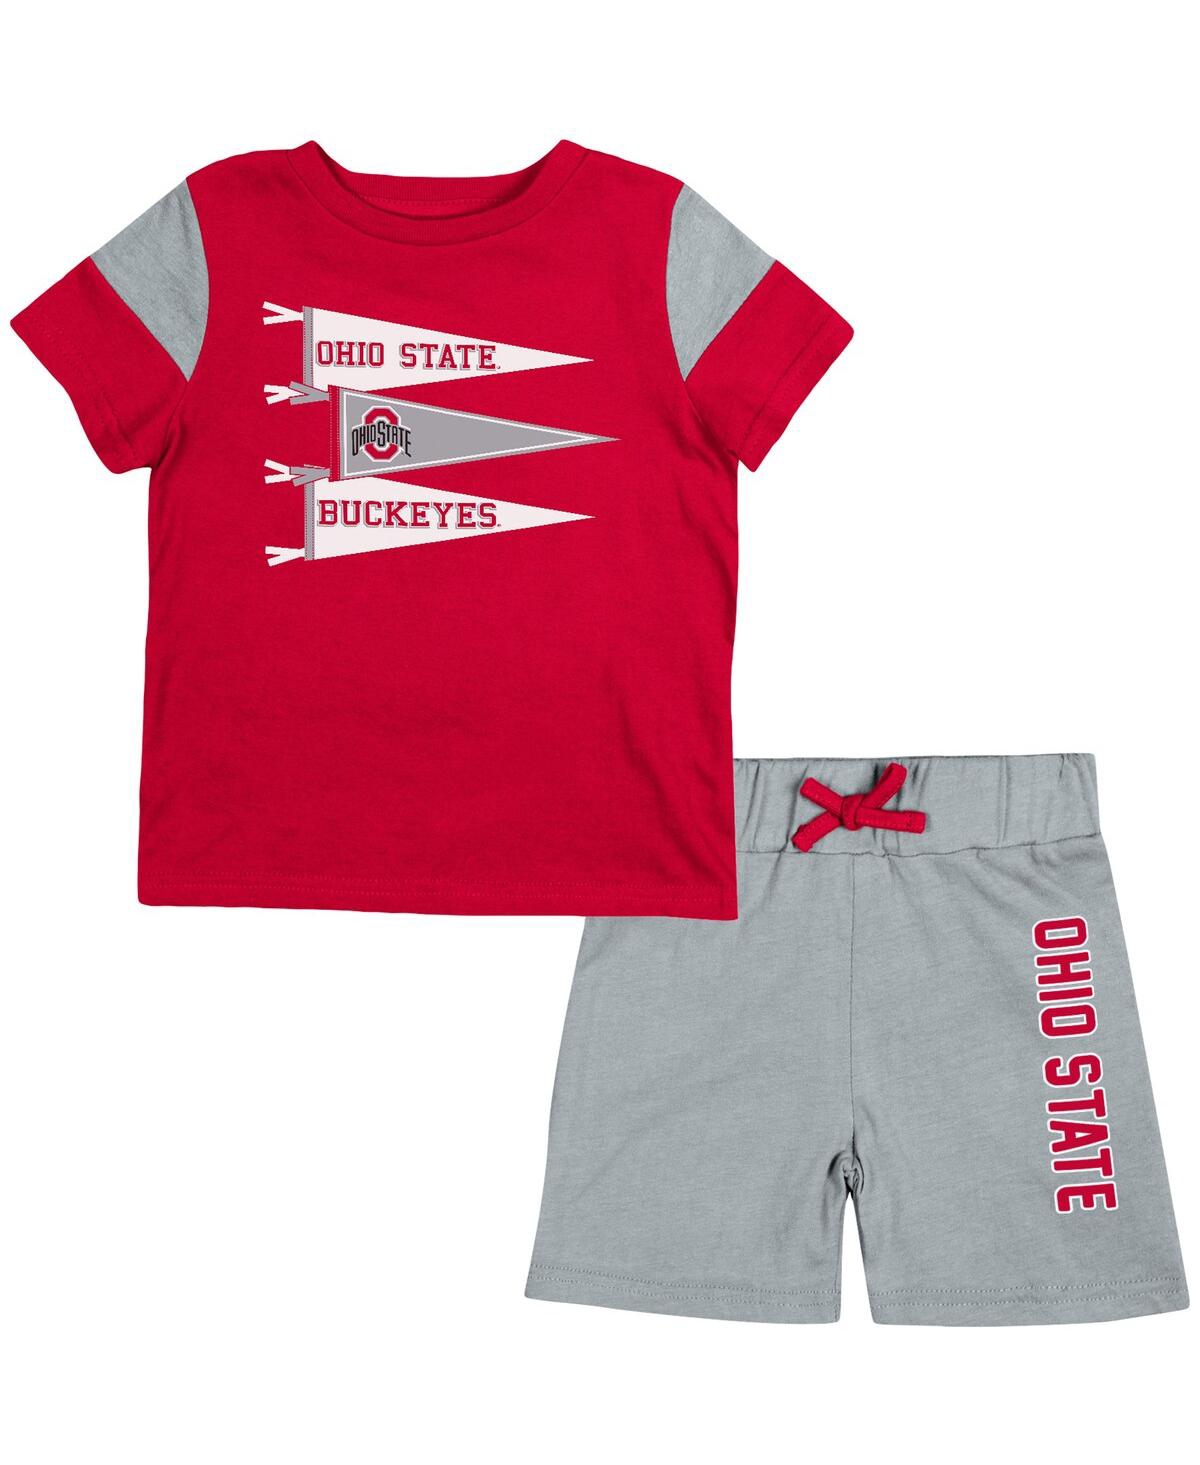 Shop Colosseum Newborn And Infant Boys And Girls  Scarlet, Gray Ohio State Buckeyes Baby Herman T-shirt An In Scarlet,gray